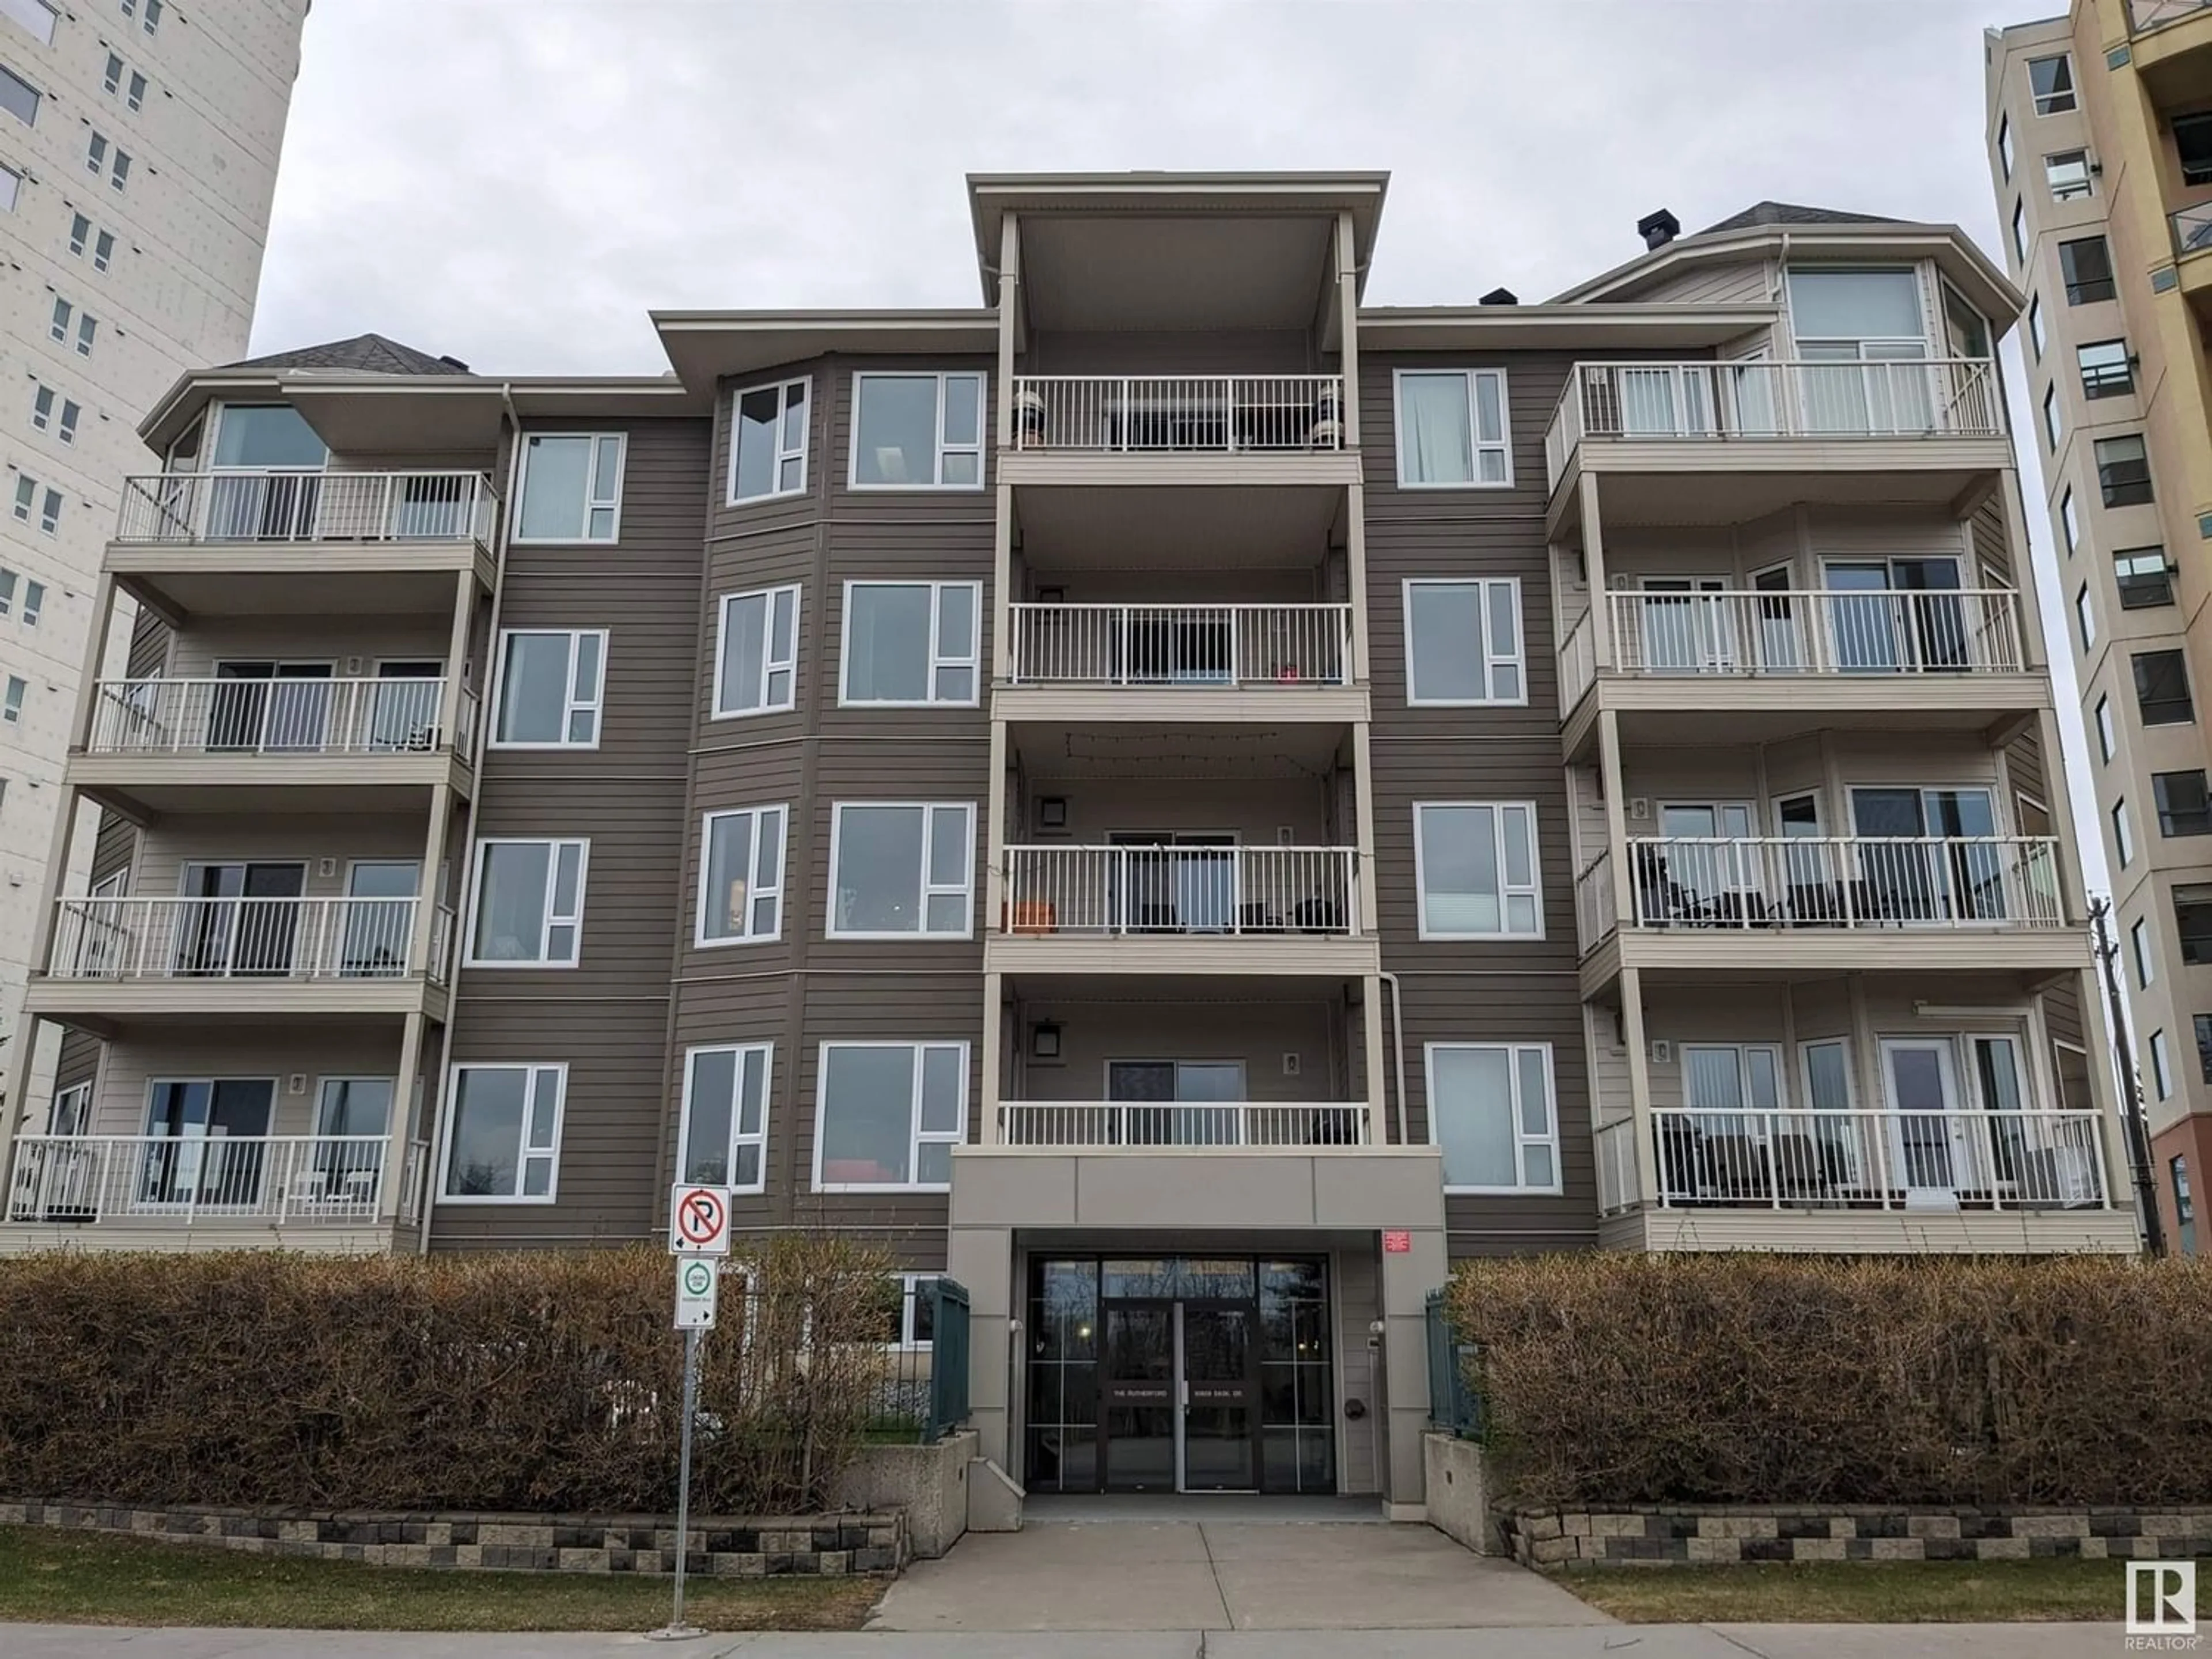 A pic from exterior of the house or condo for #302 10809 SASKATCHEWAN DR NW, Edmonton Alberta T6E4S5